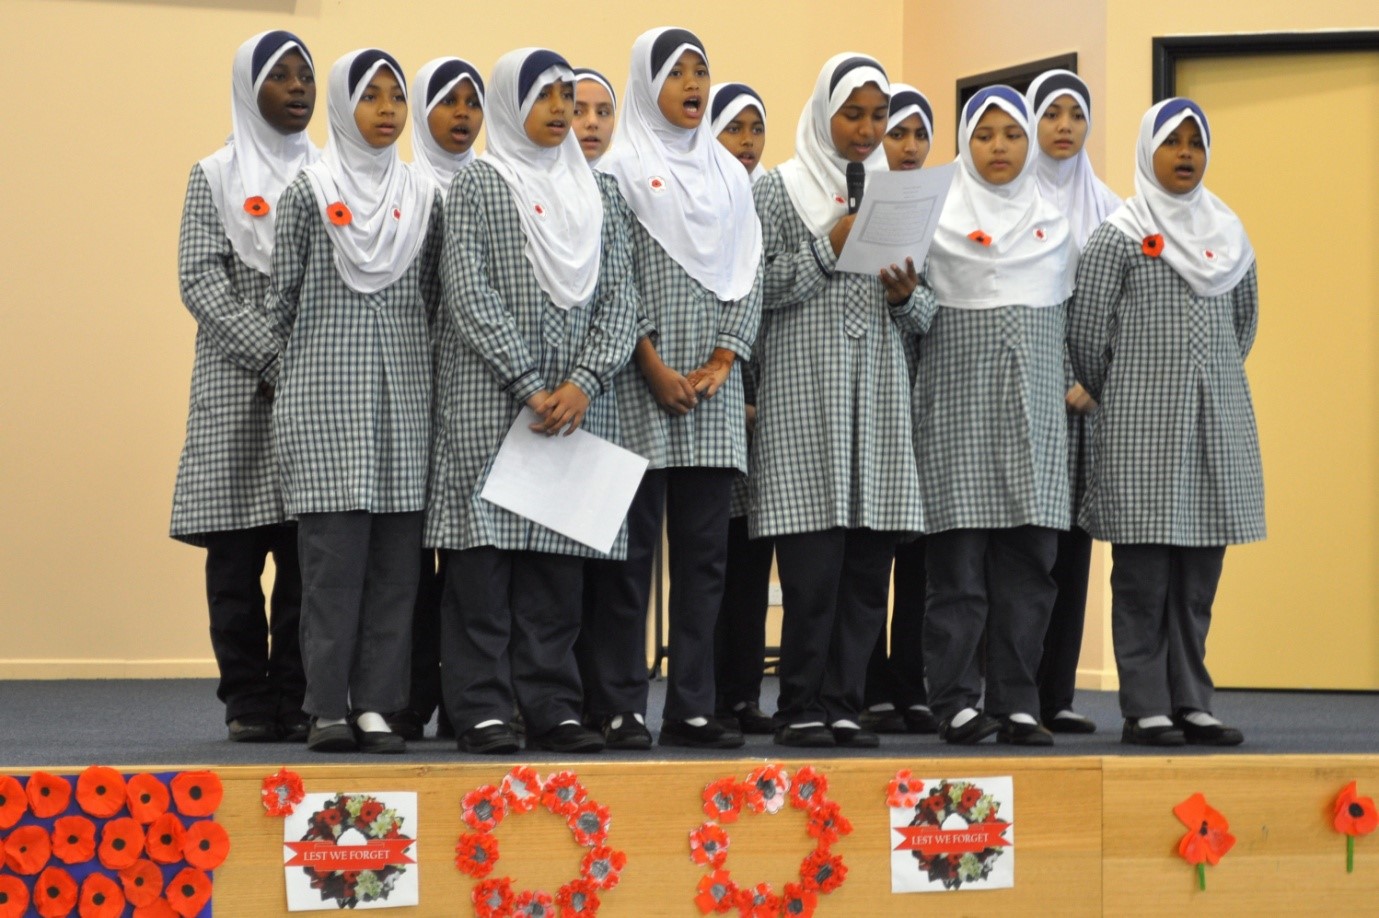 The National Anthem sang by our nasheed group